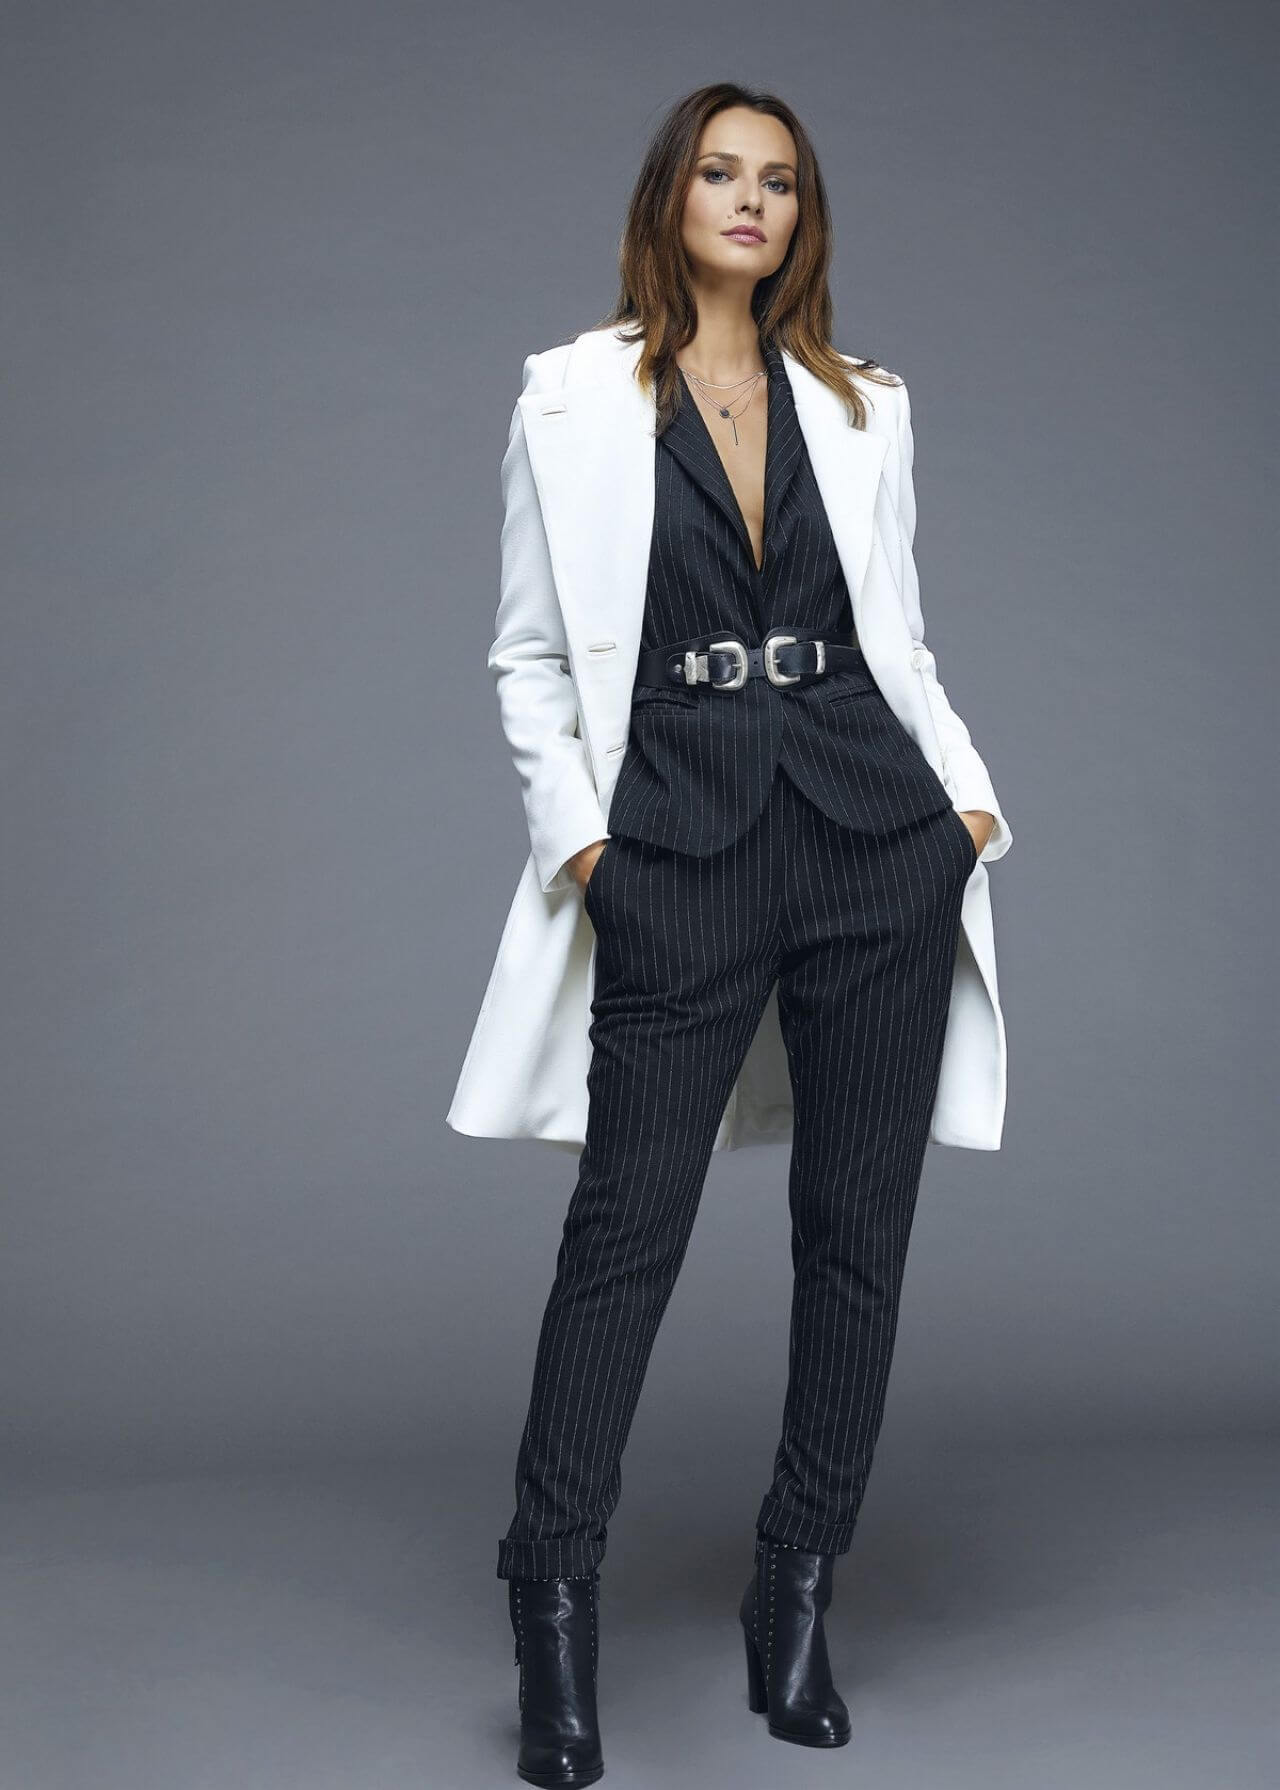 Anna Safroncik In White Long Blazer With Black Striped Pantsuit Outfit At Talco Campaign Autumn/Winter